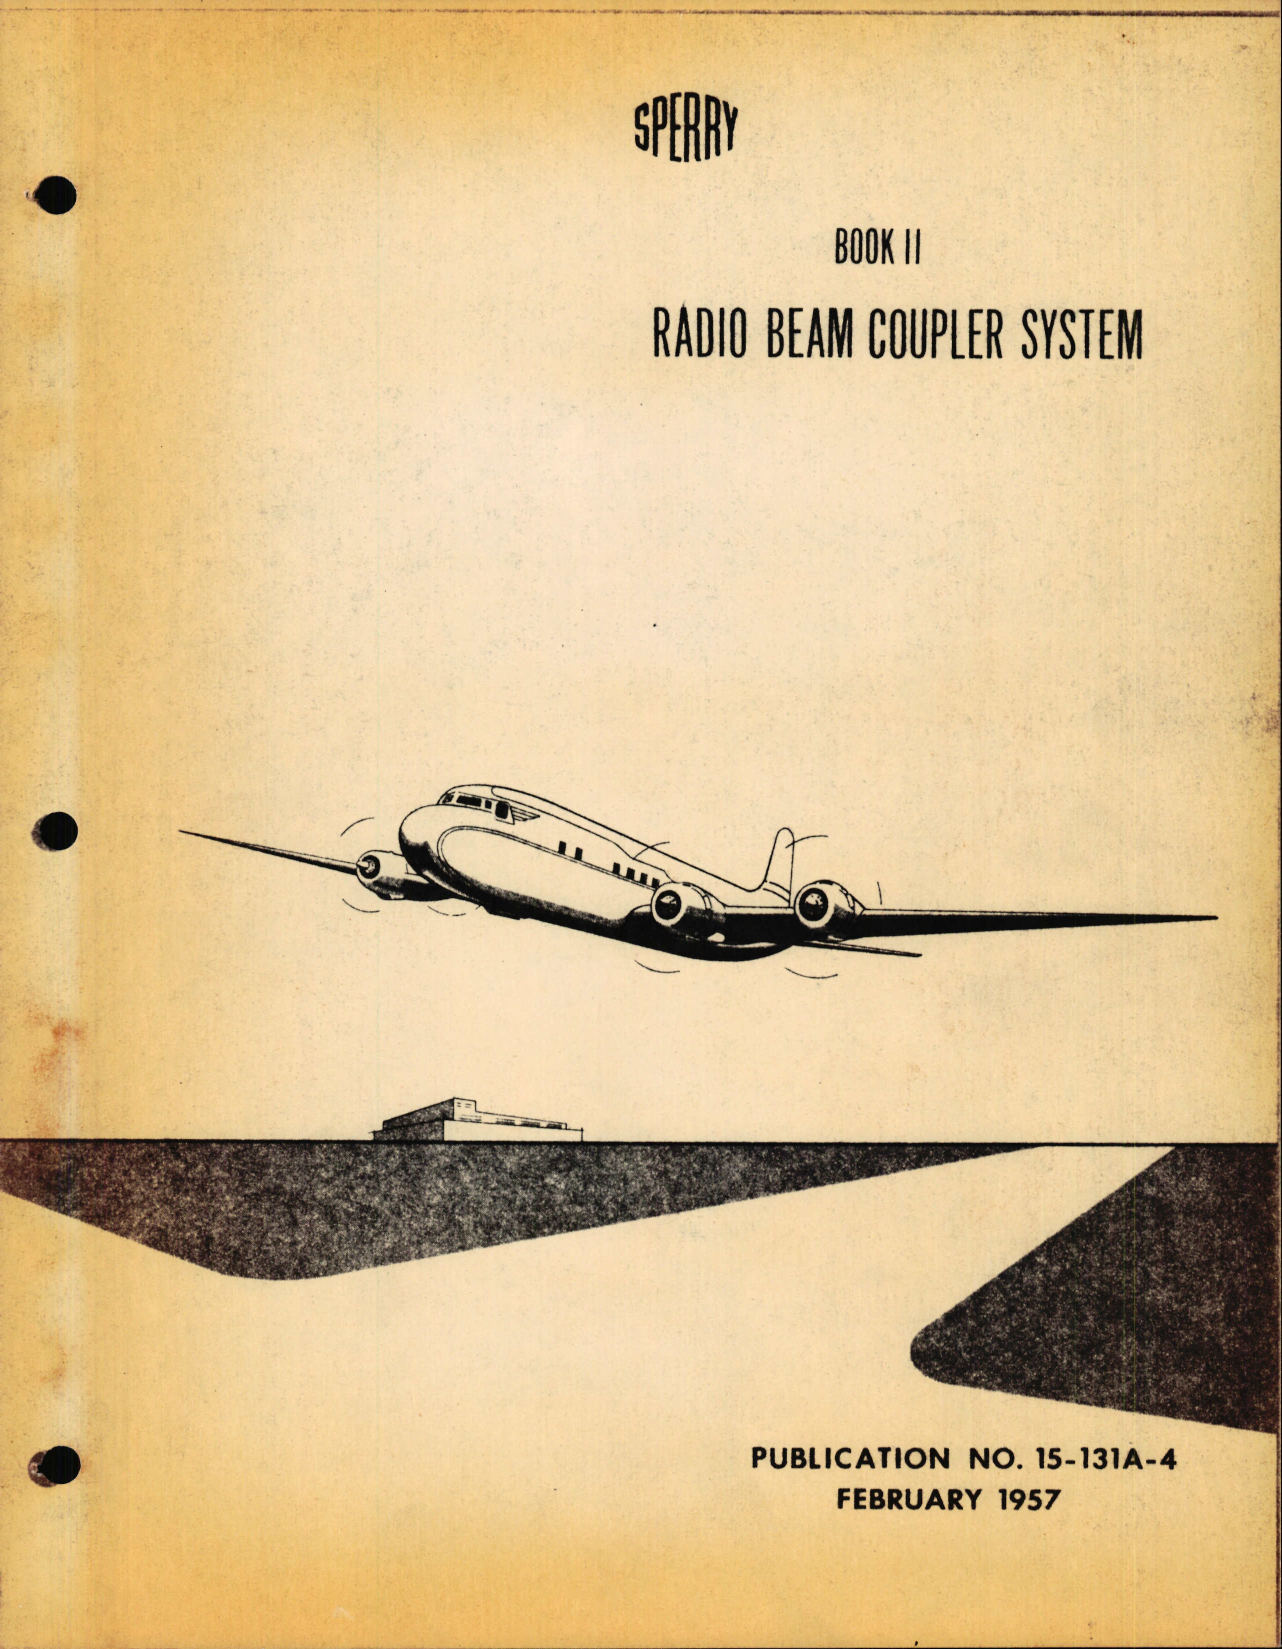 Sample page 1 from AirCorps Library document: Radio Beam Coupler System, Sperry Book II